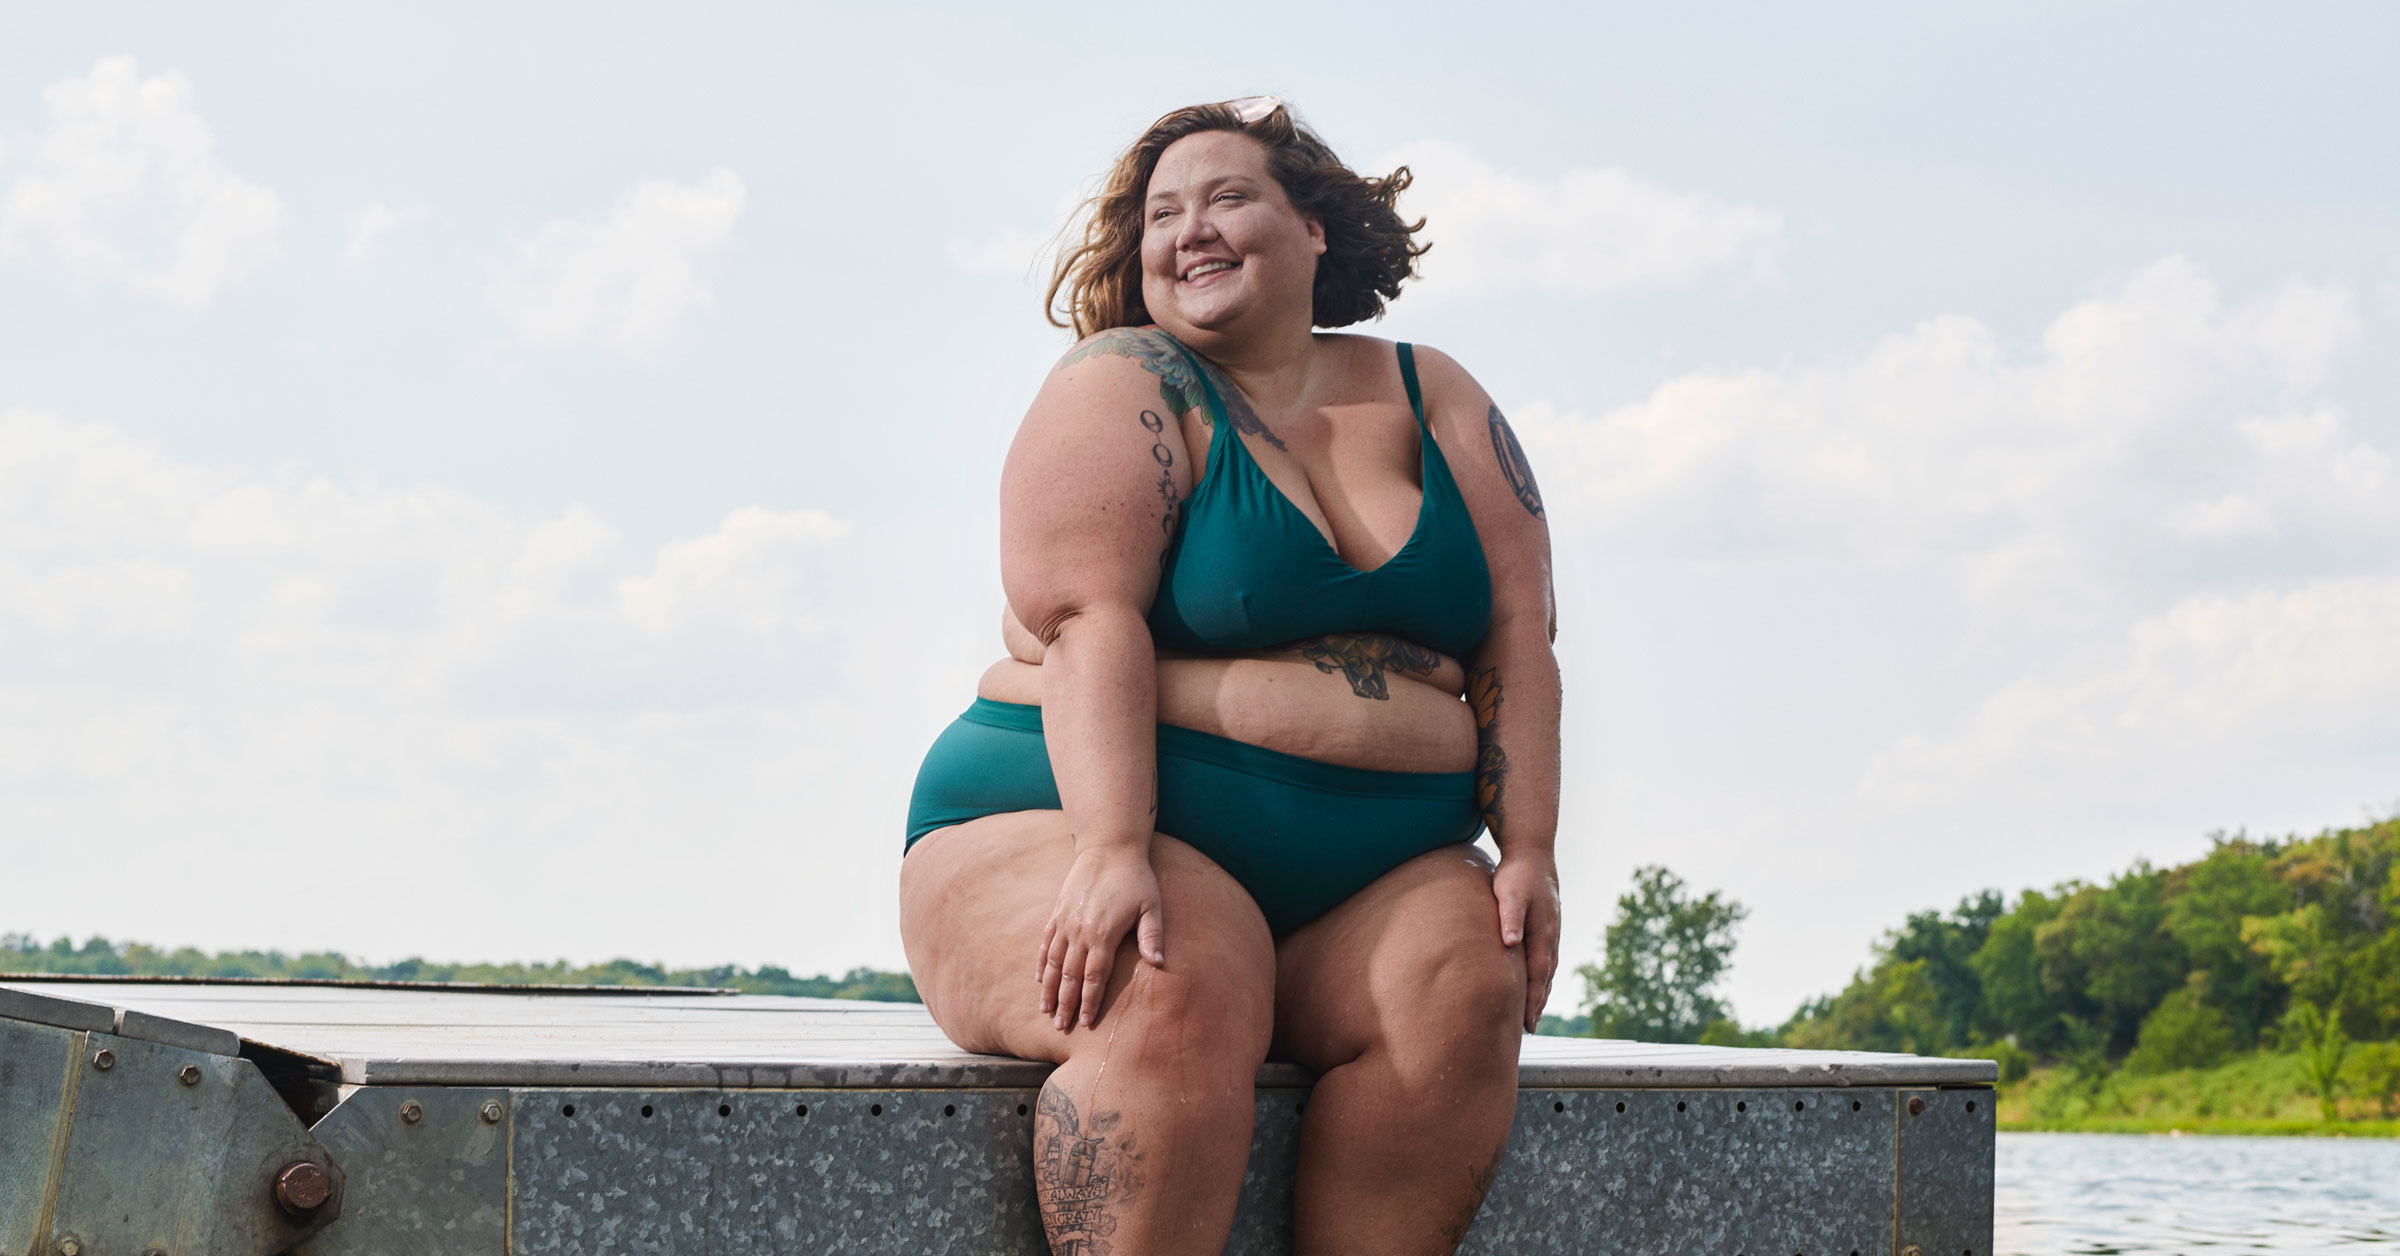 https://highline.huffingtonpost.com/articles/en/everything-you-know-about-obesity-is-wrong/